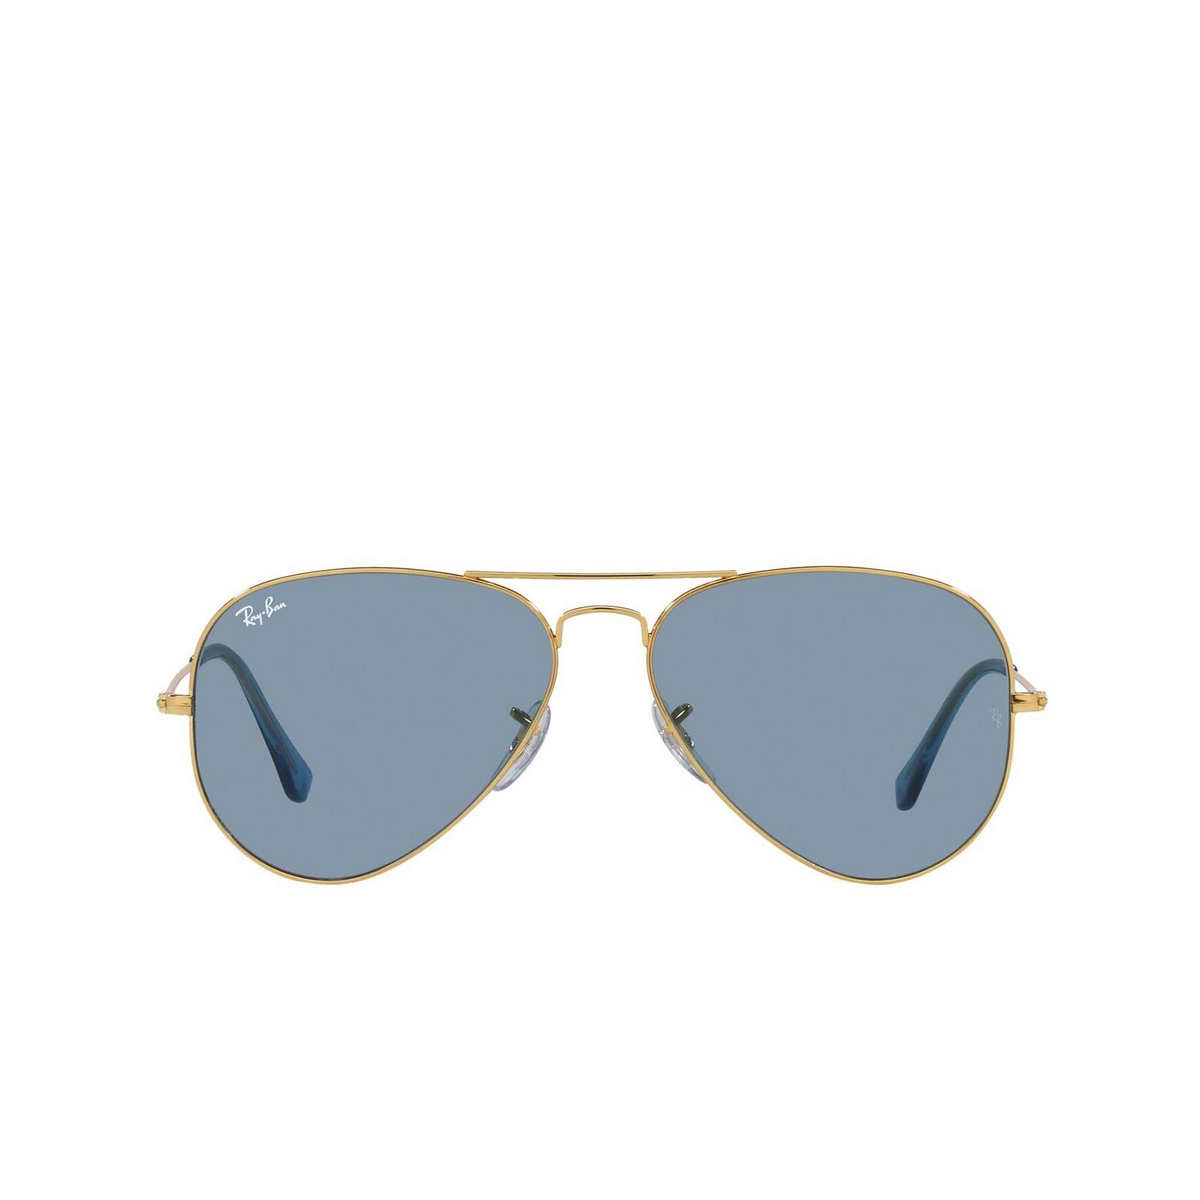 Ray-Ban AVIATOR LARGE METAL Sunglasses 001/56 True Blue - front view